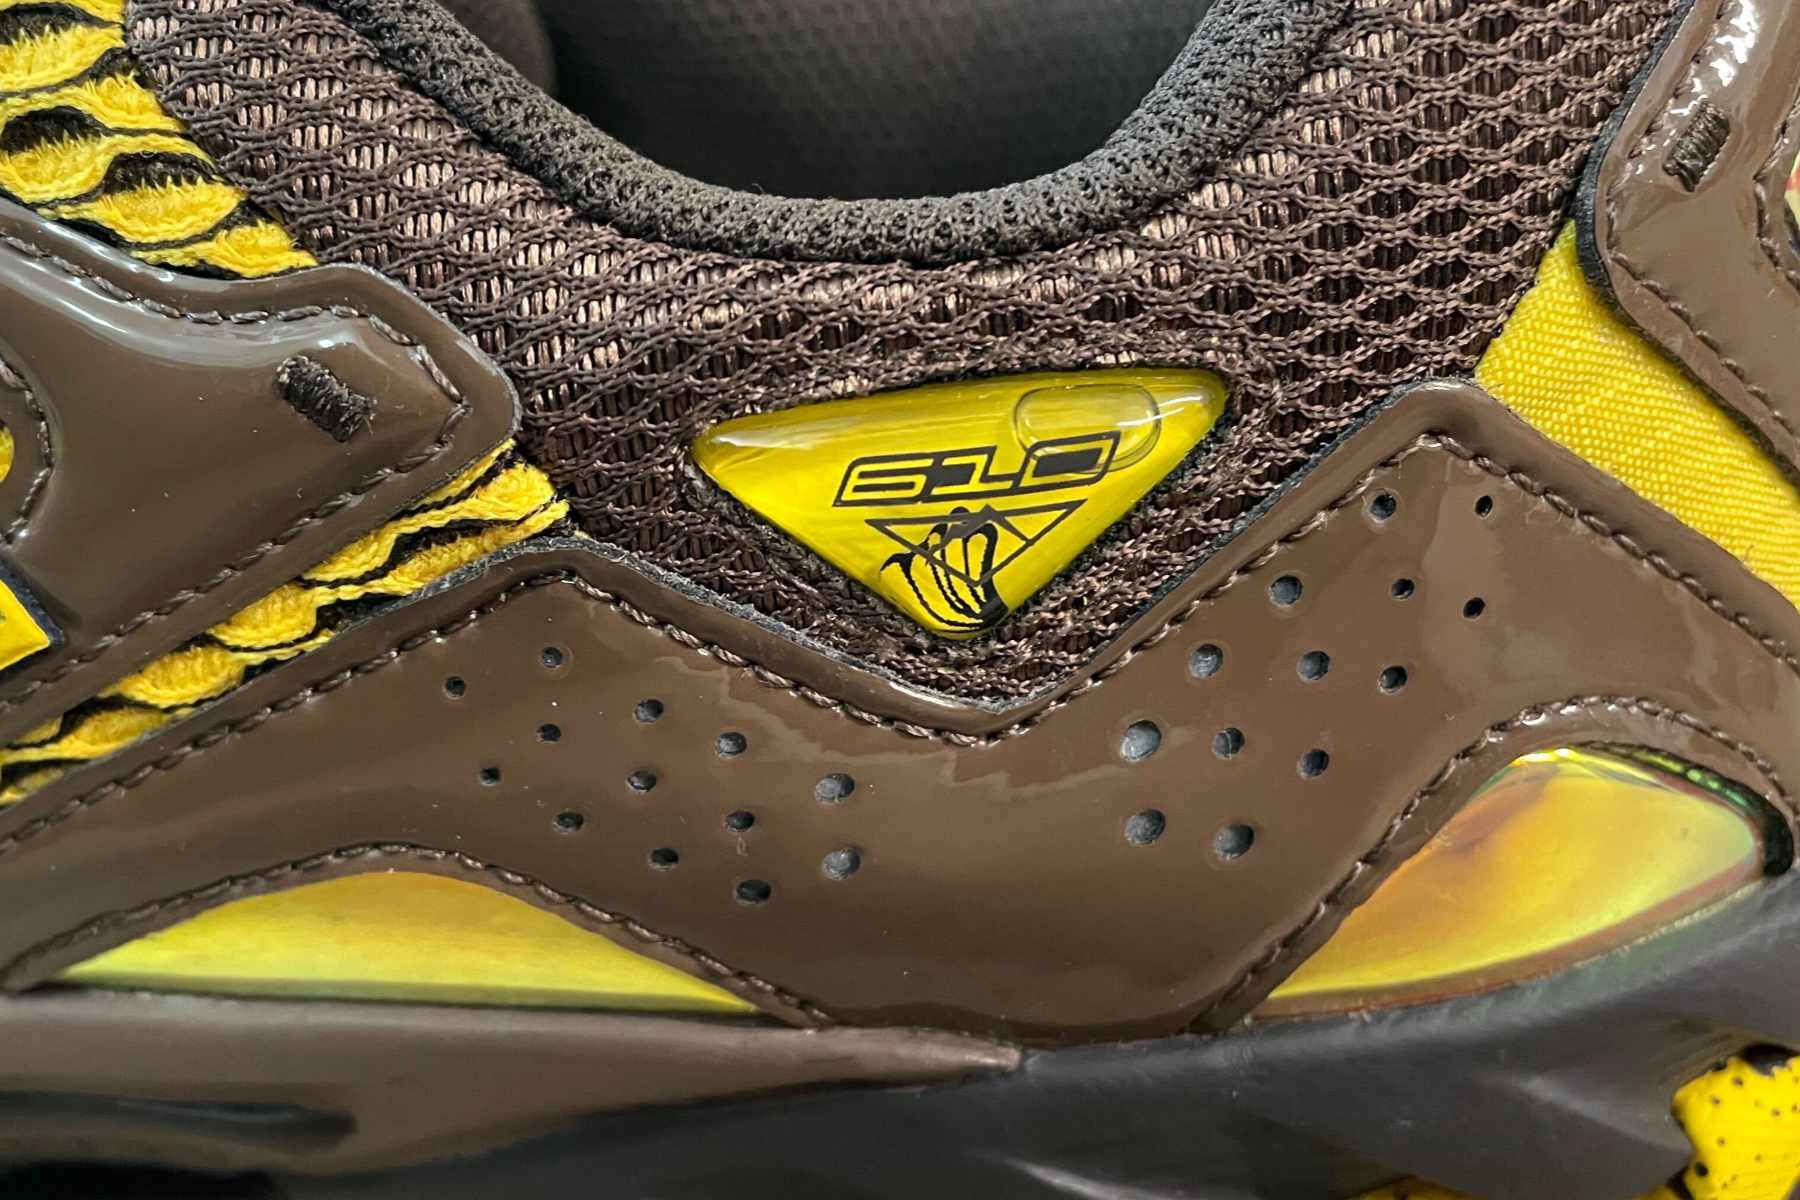 Amine's New Balance shoe collab, "The Mooz," seen in detail photo of "610" branding and banana